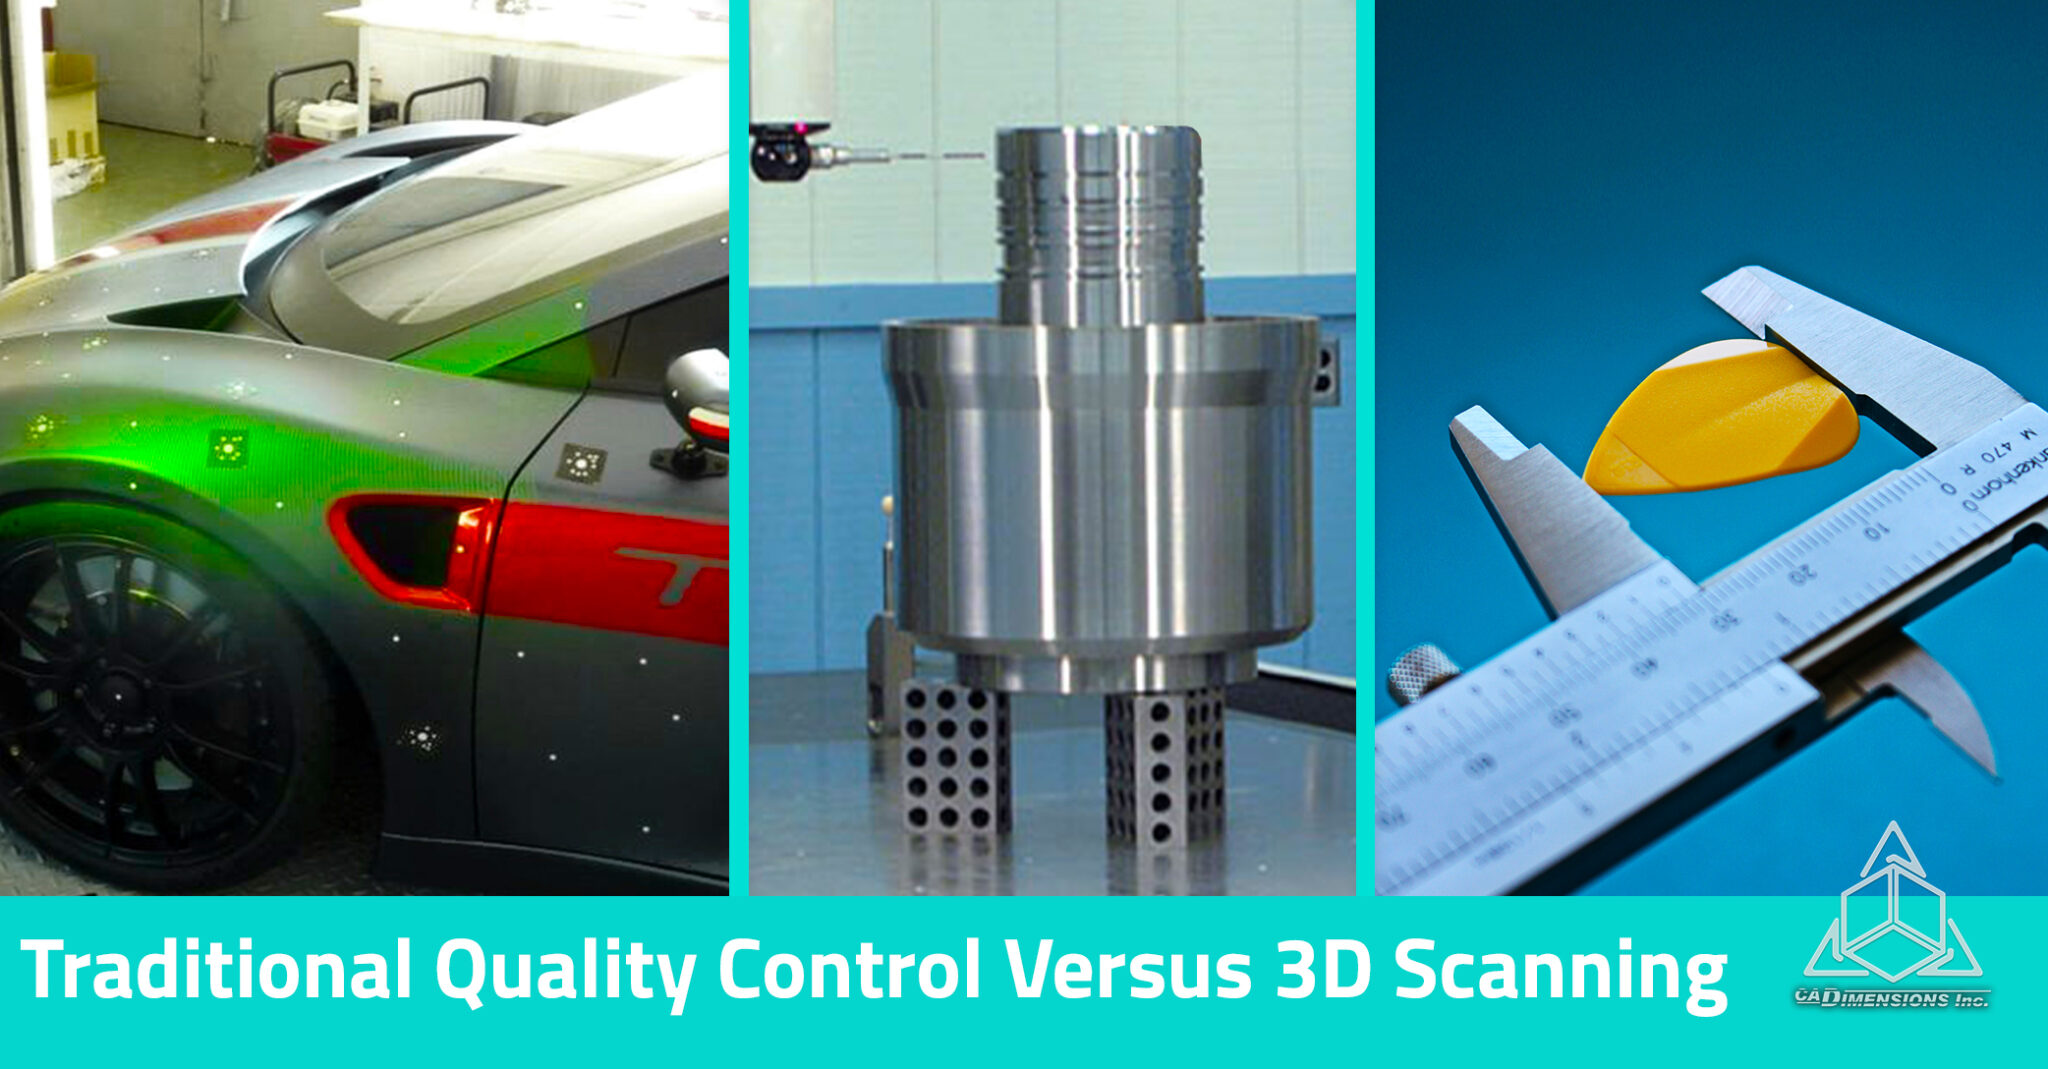 8 Reasons 3D Scanners Crush Traditional Quality Control